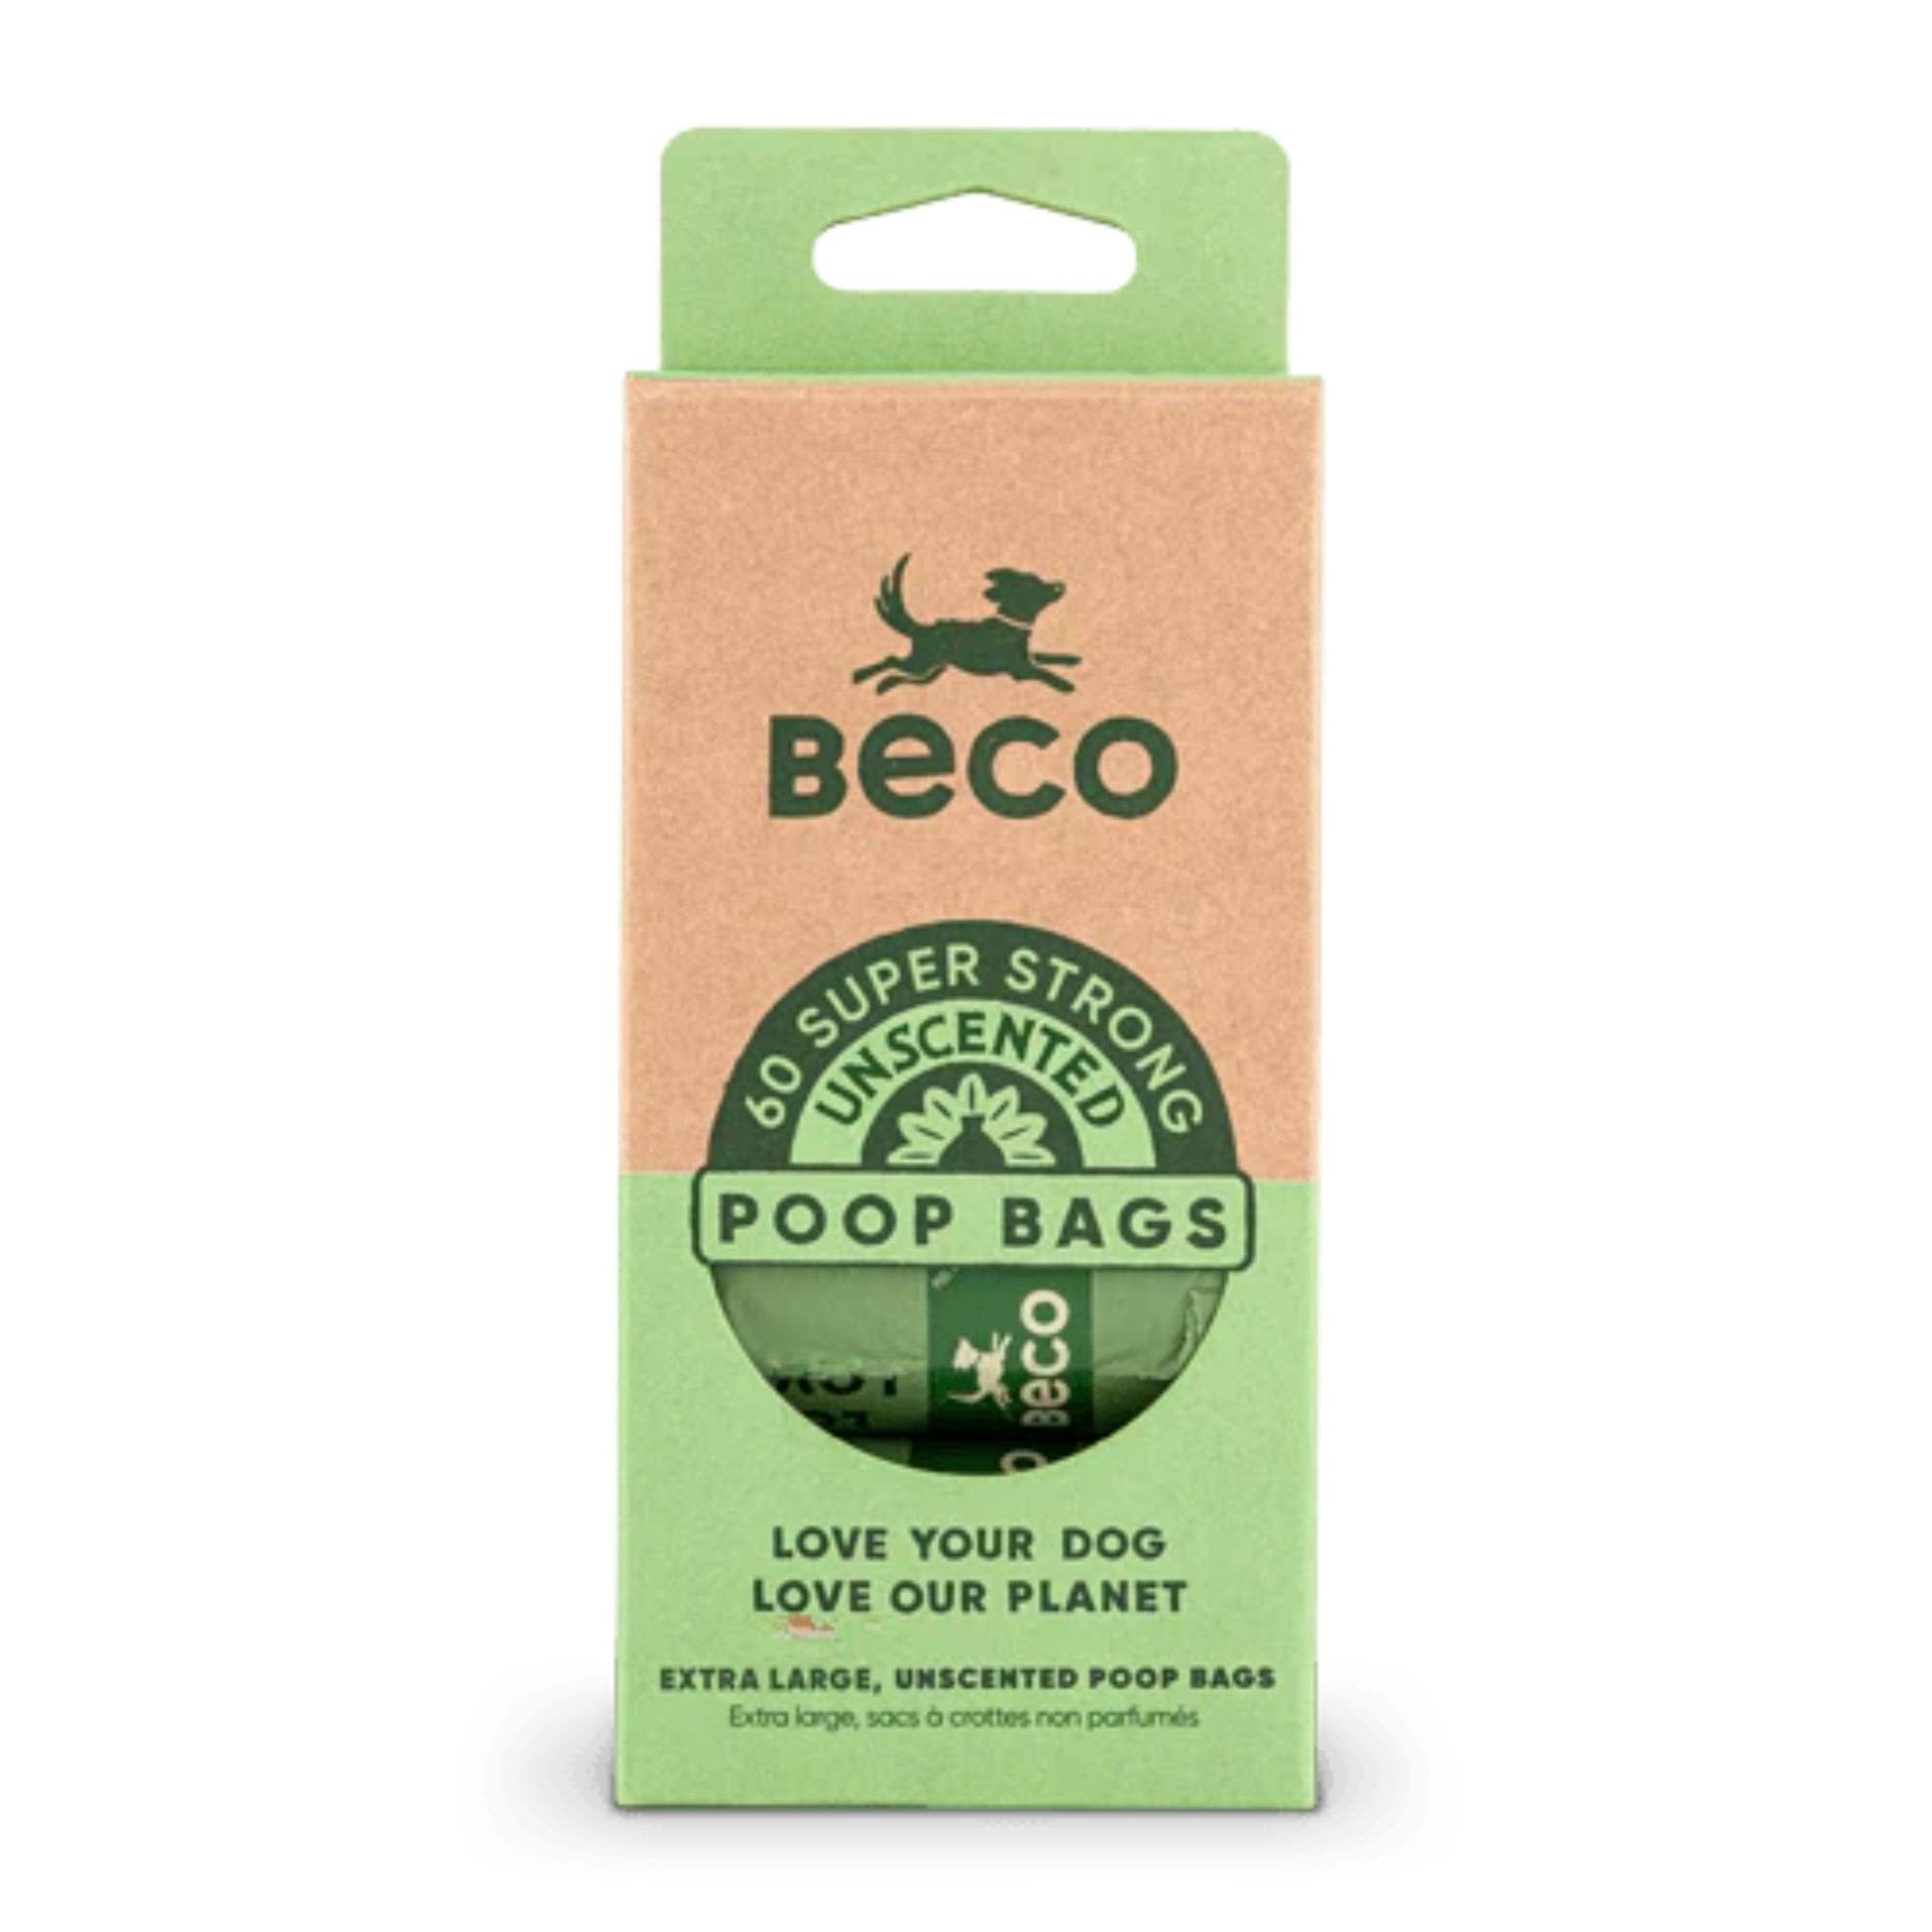 Beco Poop Bags 120 / Unscented